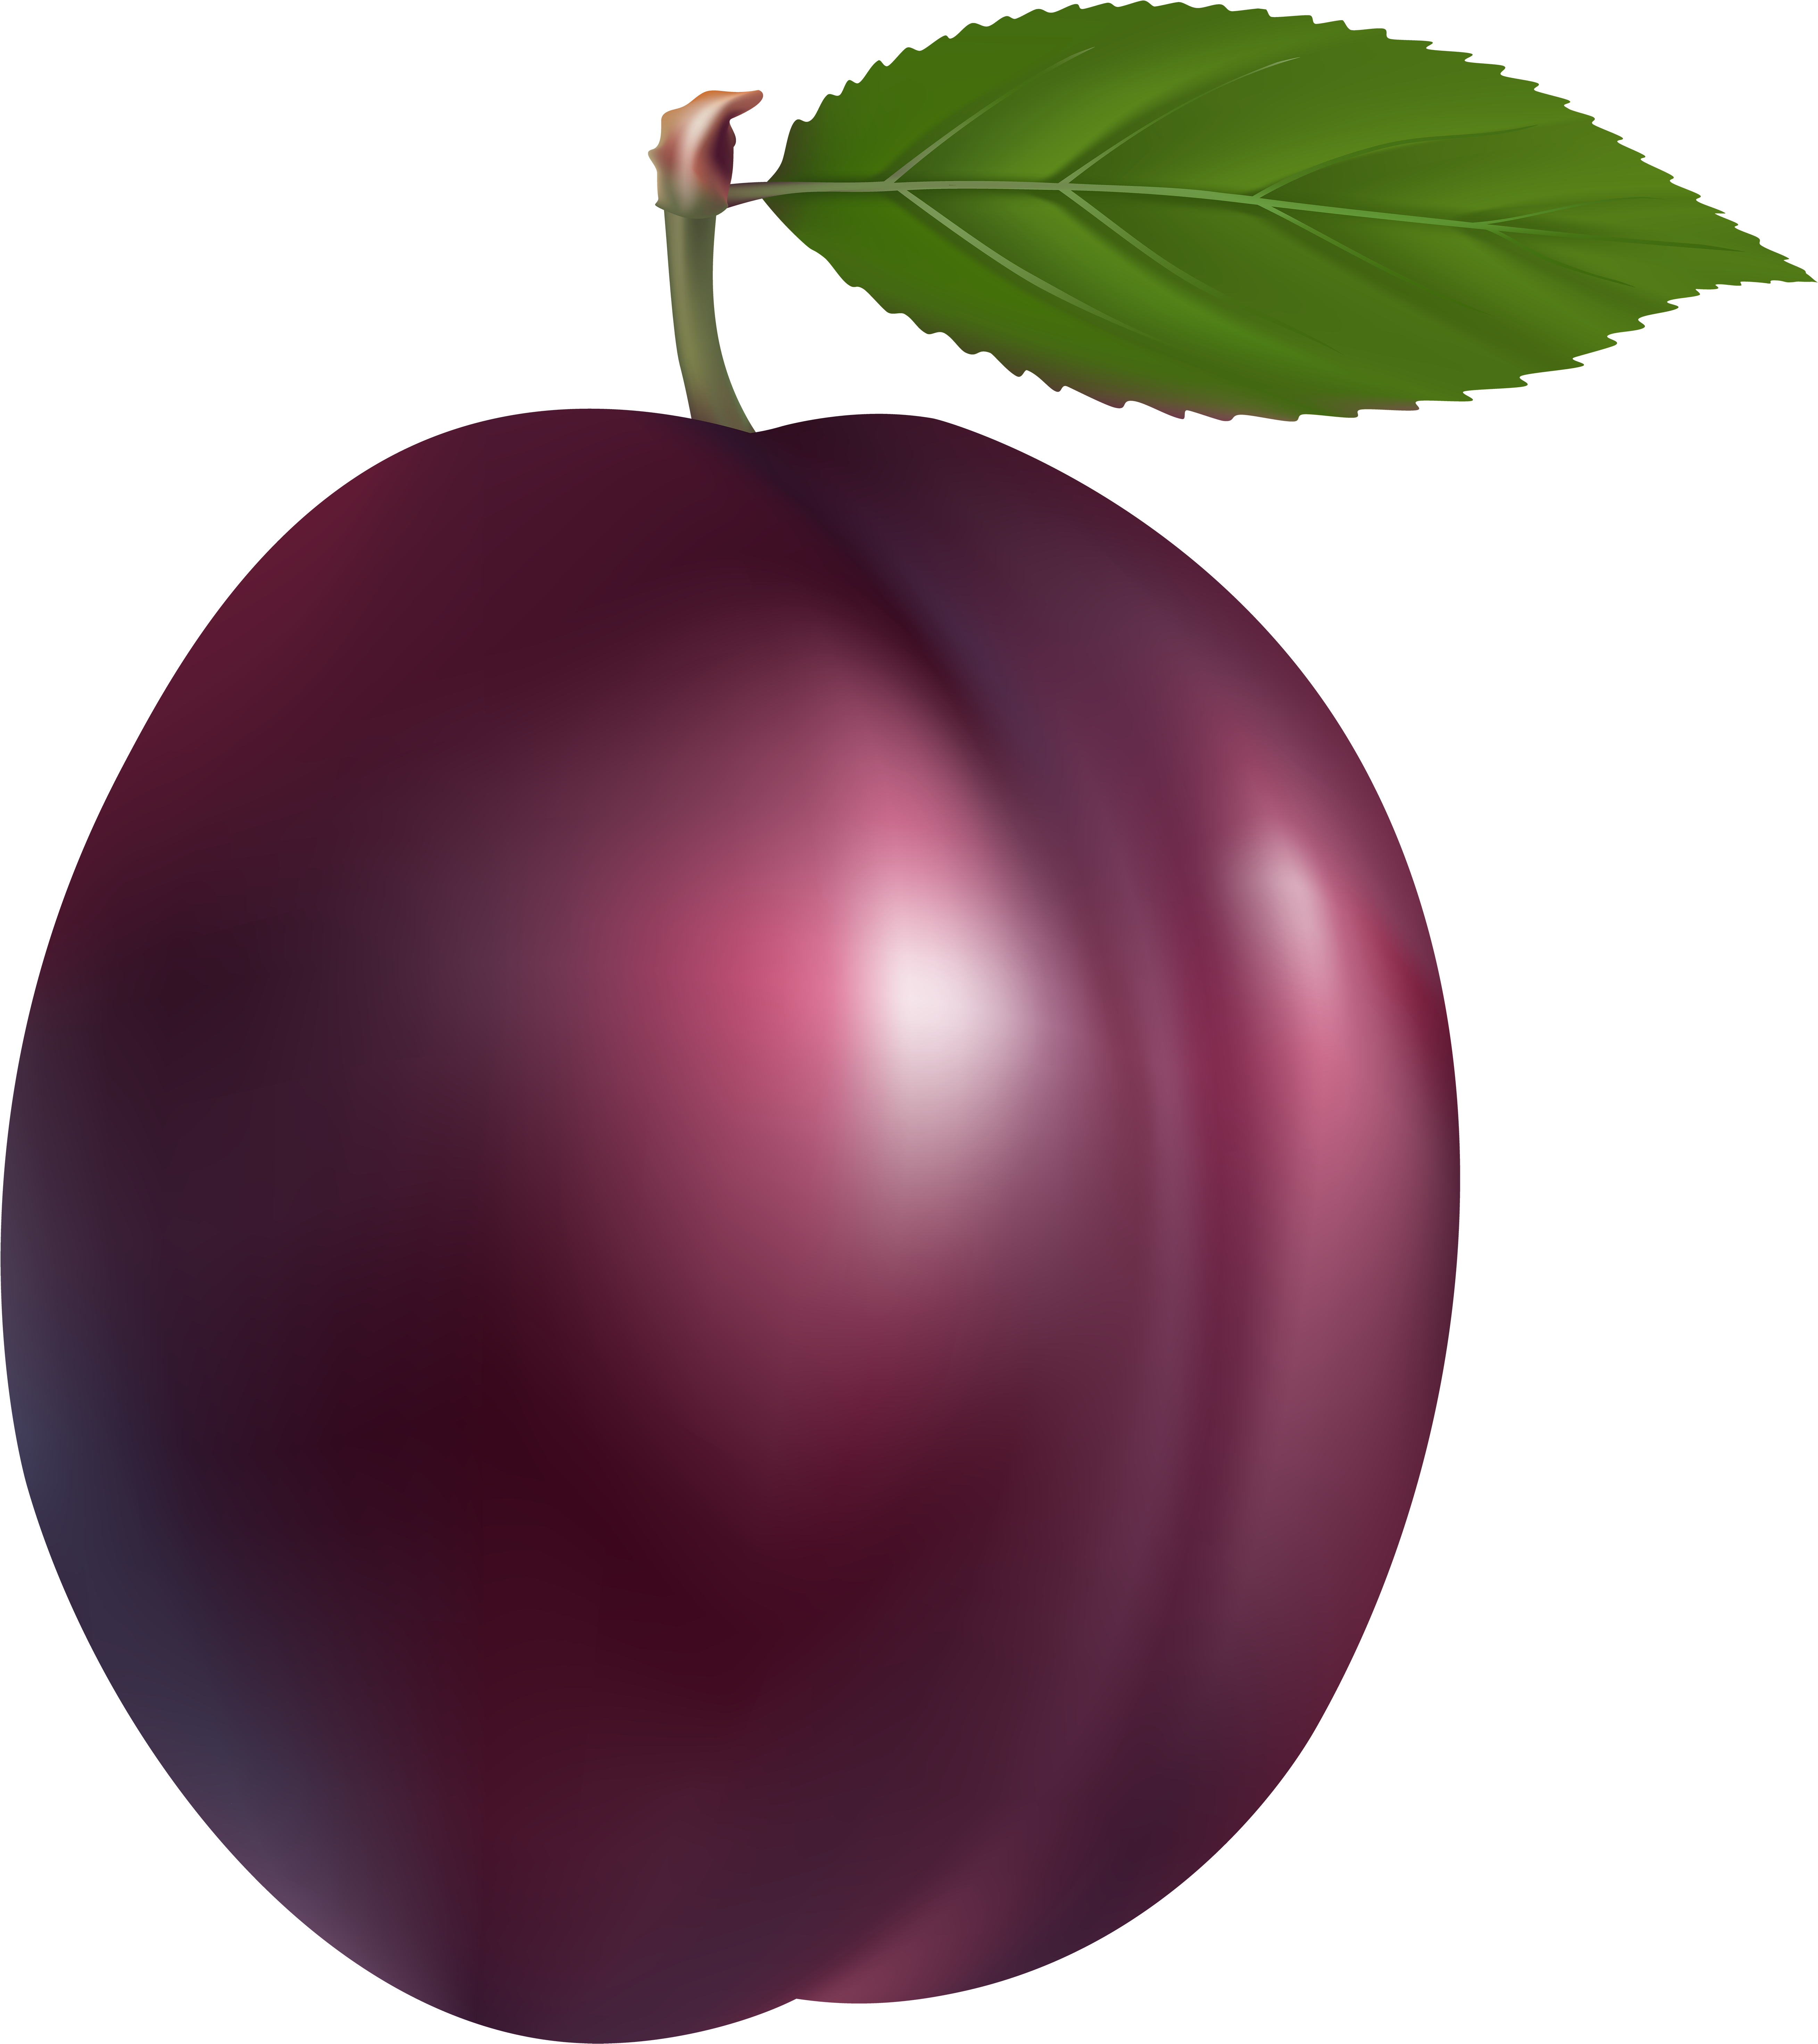 Free Plum Clipart Black And White, Download Free Clip Art.